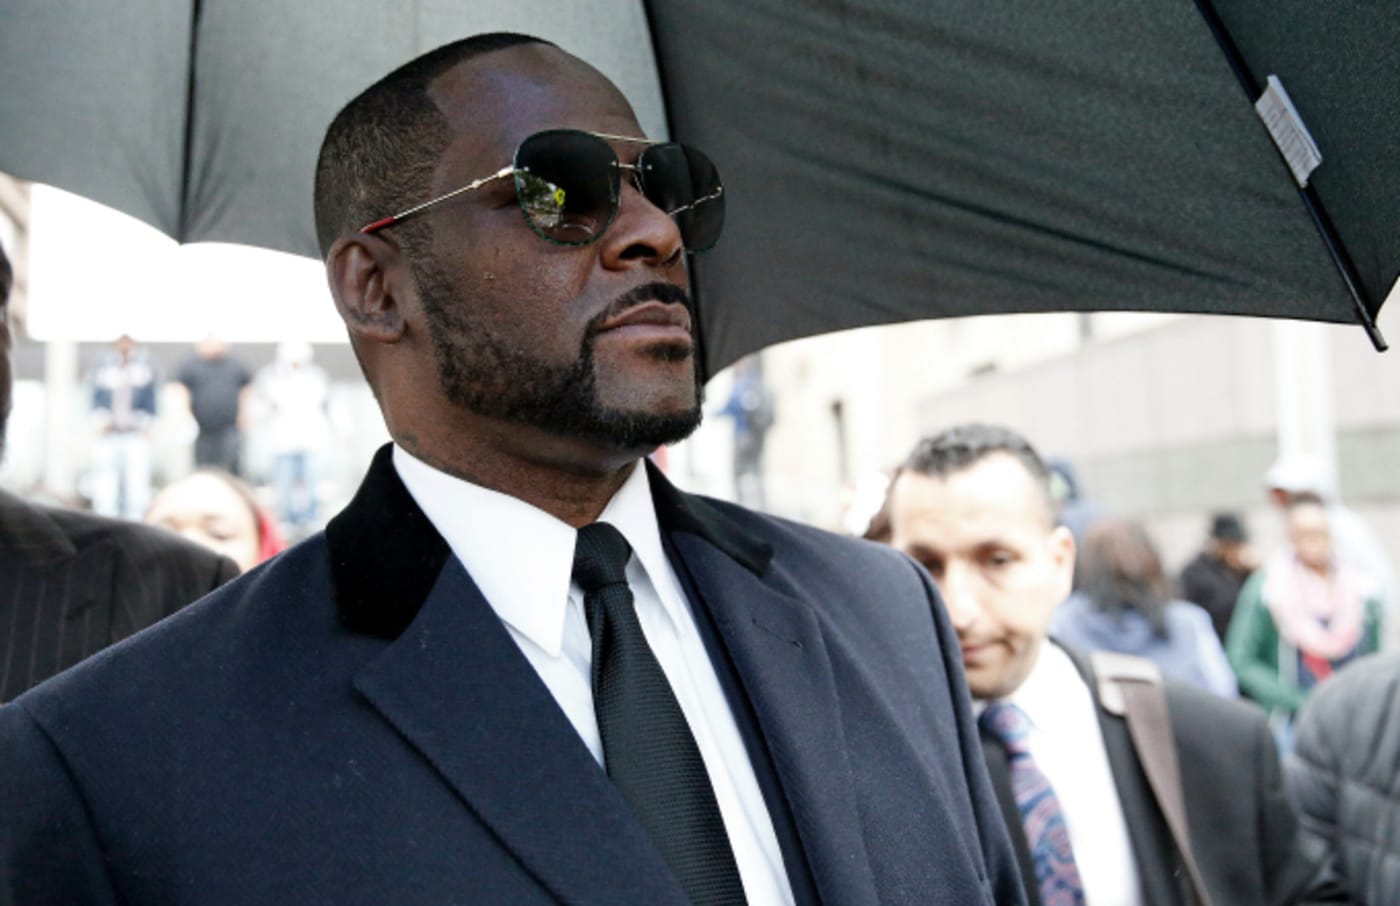 Singer R. Kelly leaves the Leighton Courthouse